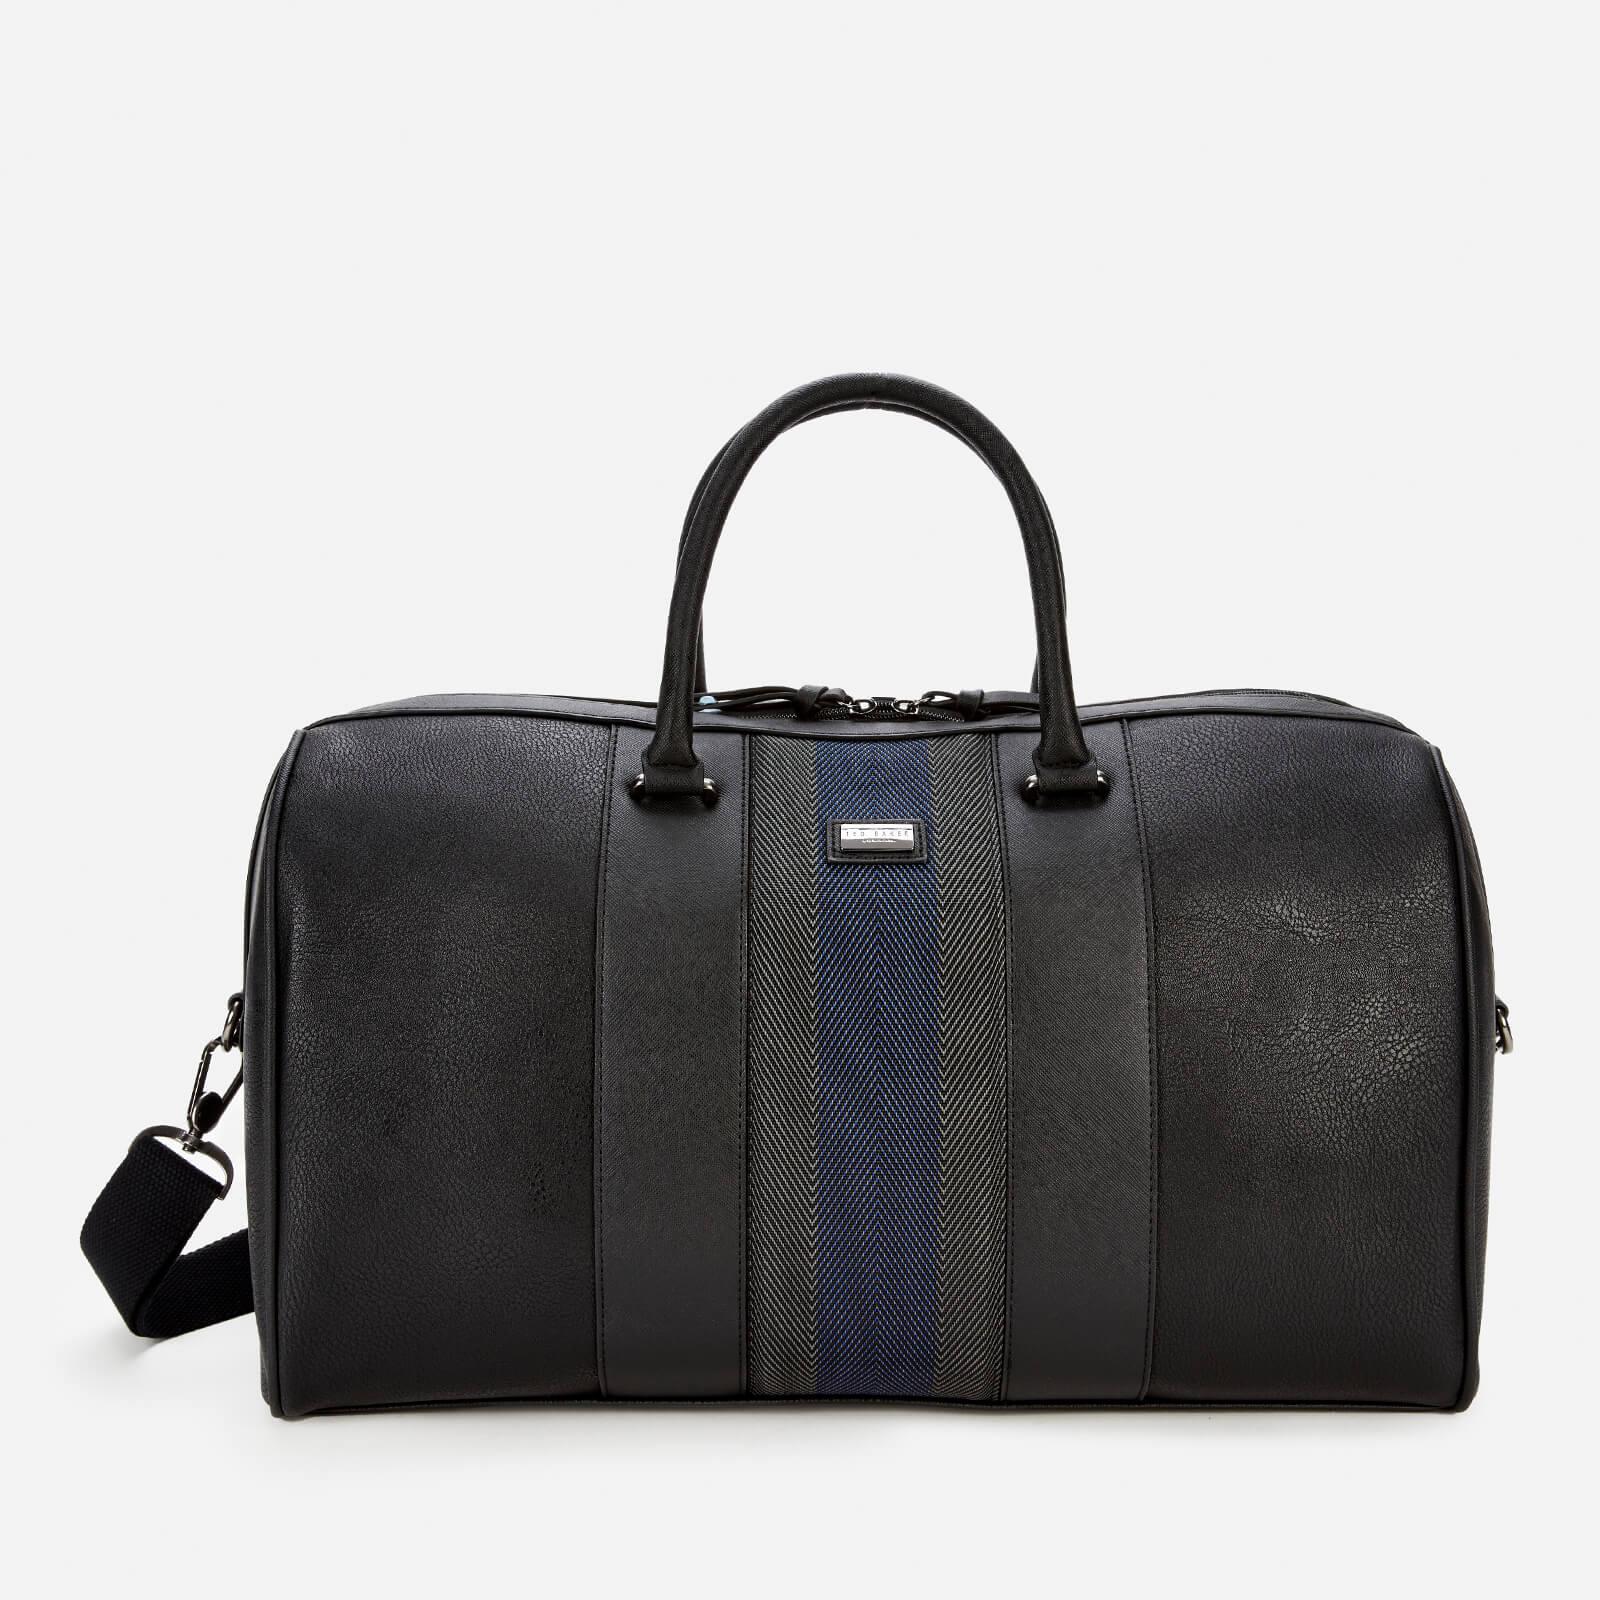 Mens Bags Duffel bags and weekend bags Blue for Men Ted Baker Suit Travel Bag in Navy 